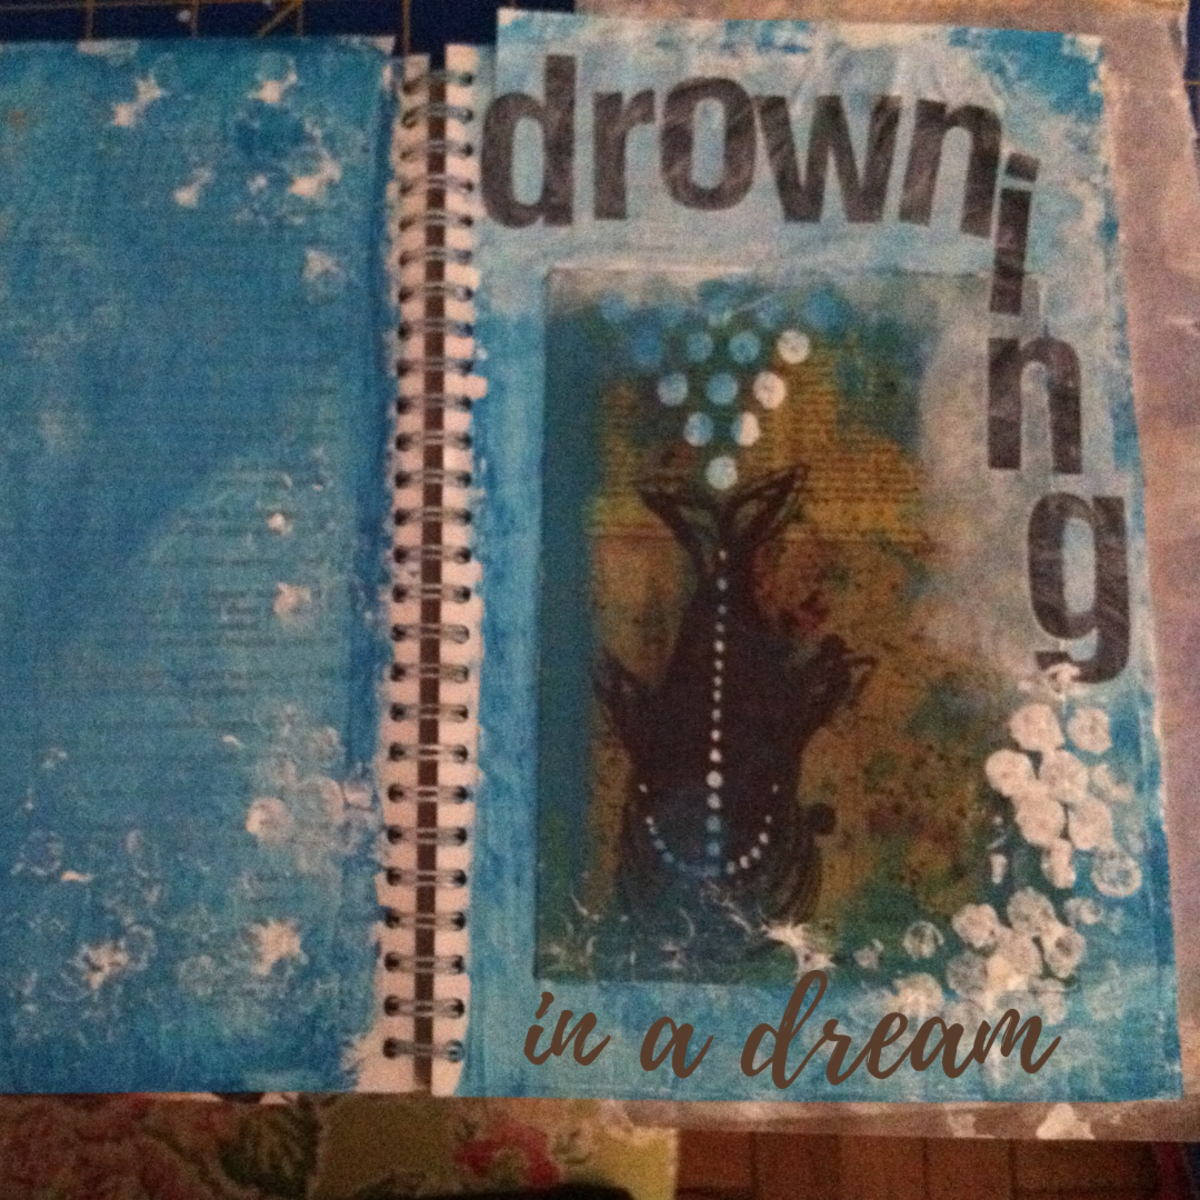 What Does Drowning in a Dream Mean?